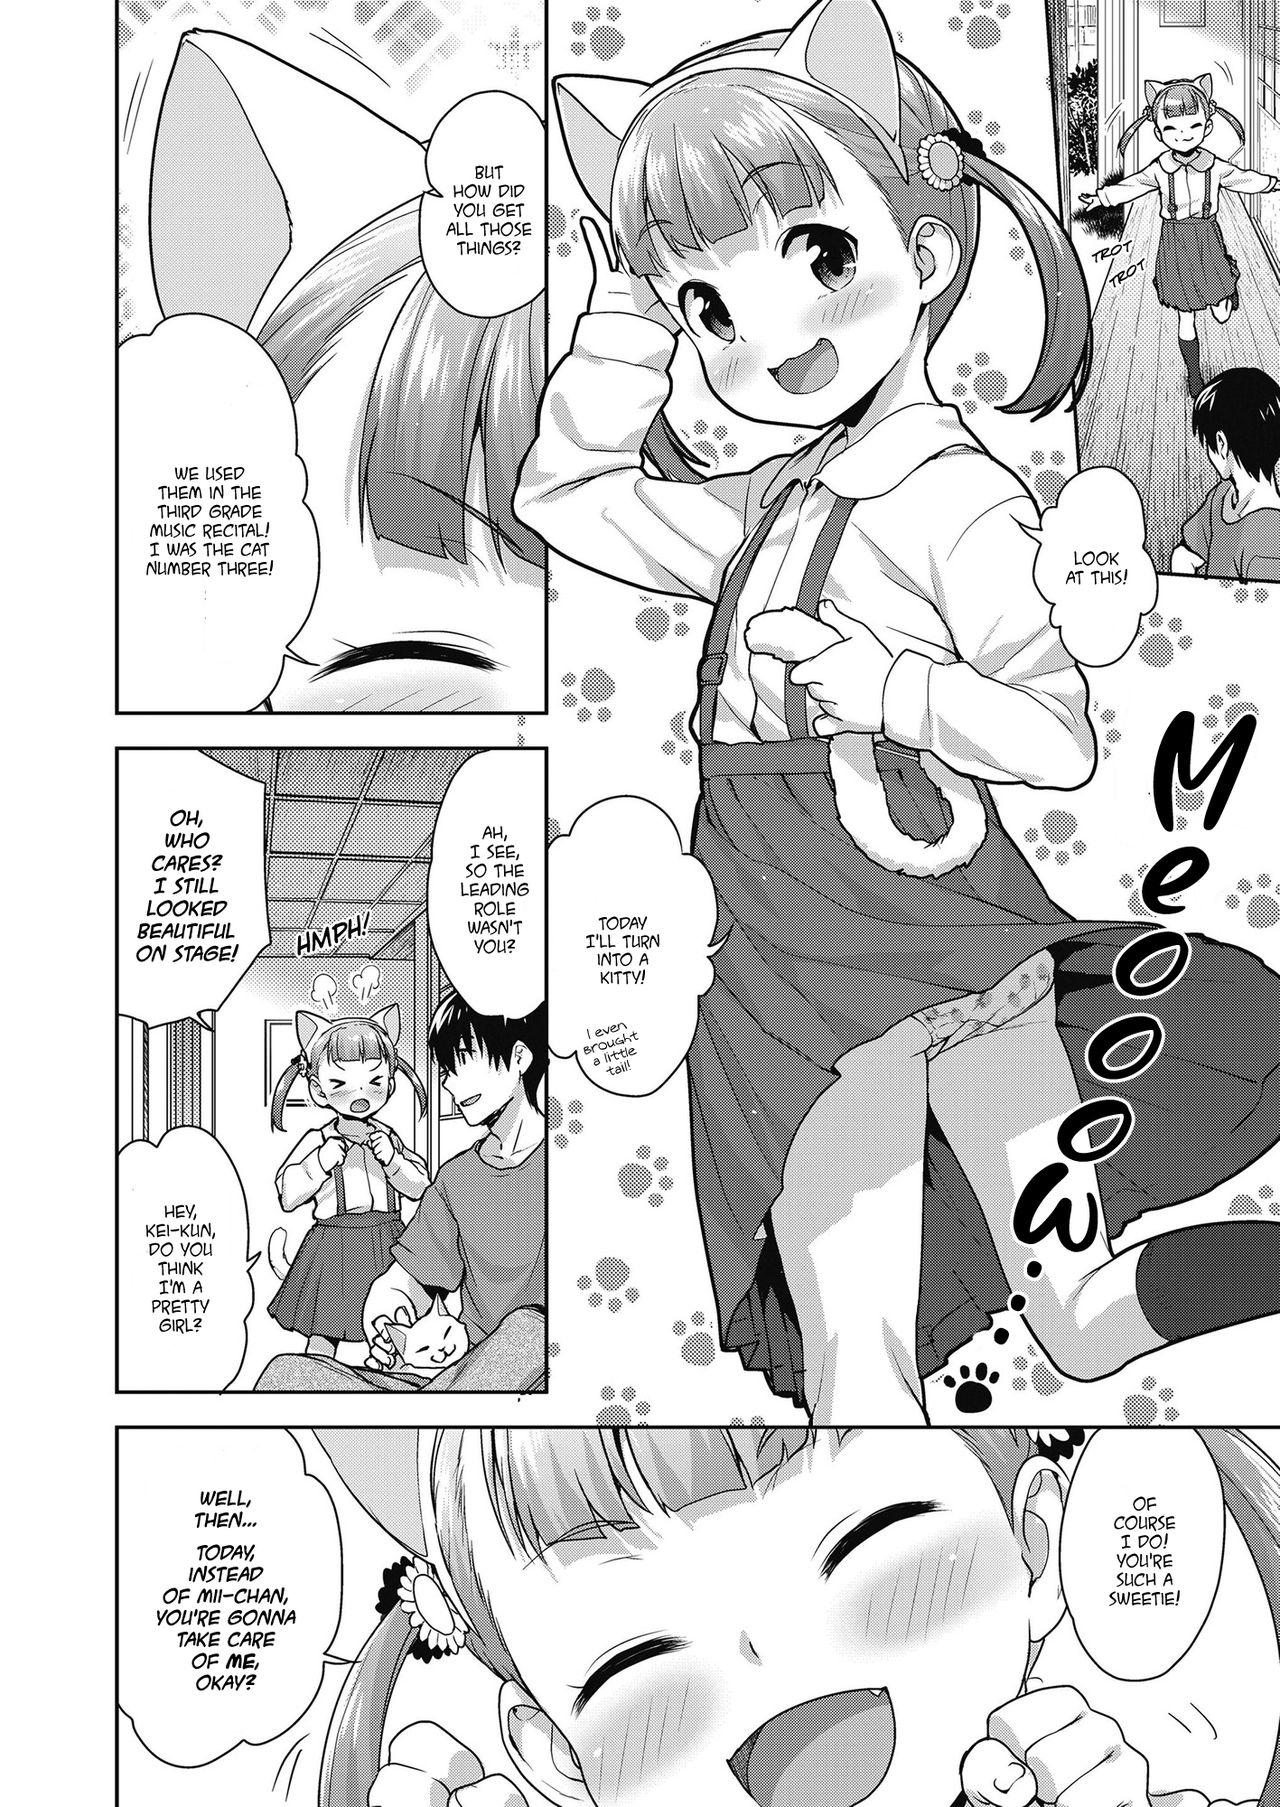 Rough Sex Koneko no Tsubomi | The Blooming of the Kitty Couple Porn - Page 2